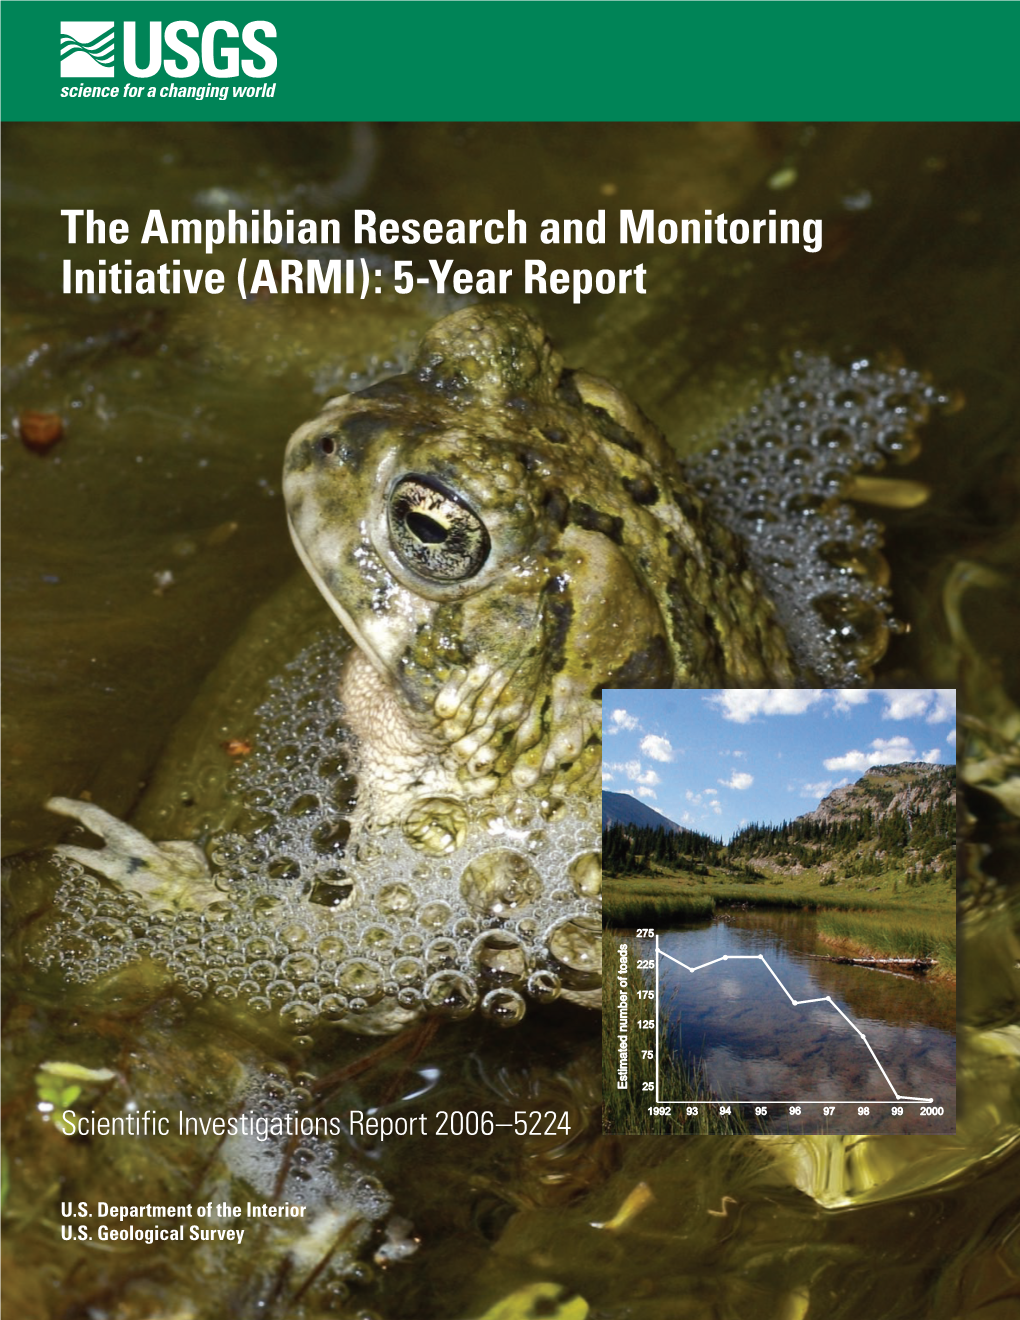 The Amphibian Research and Monitoring Initiative (ARMI): 5-Year Report